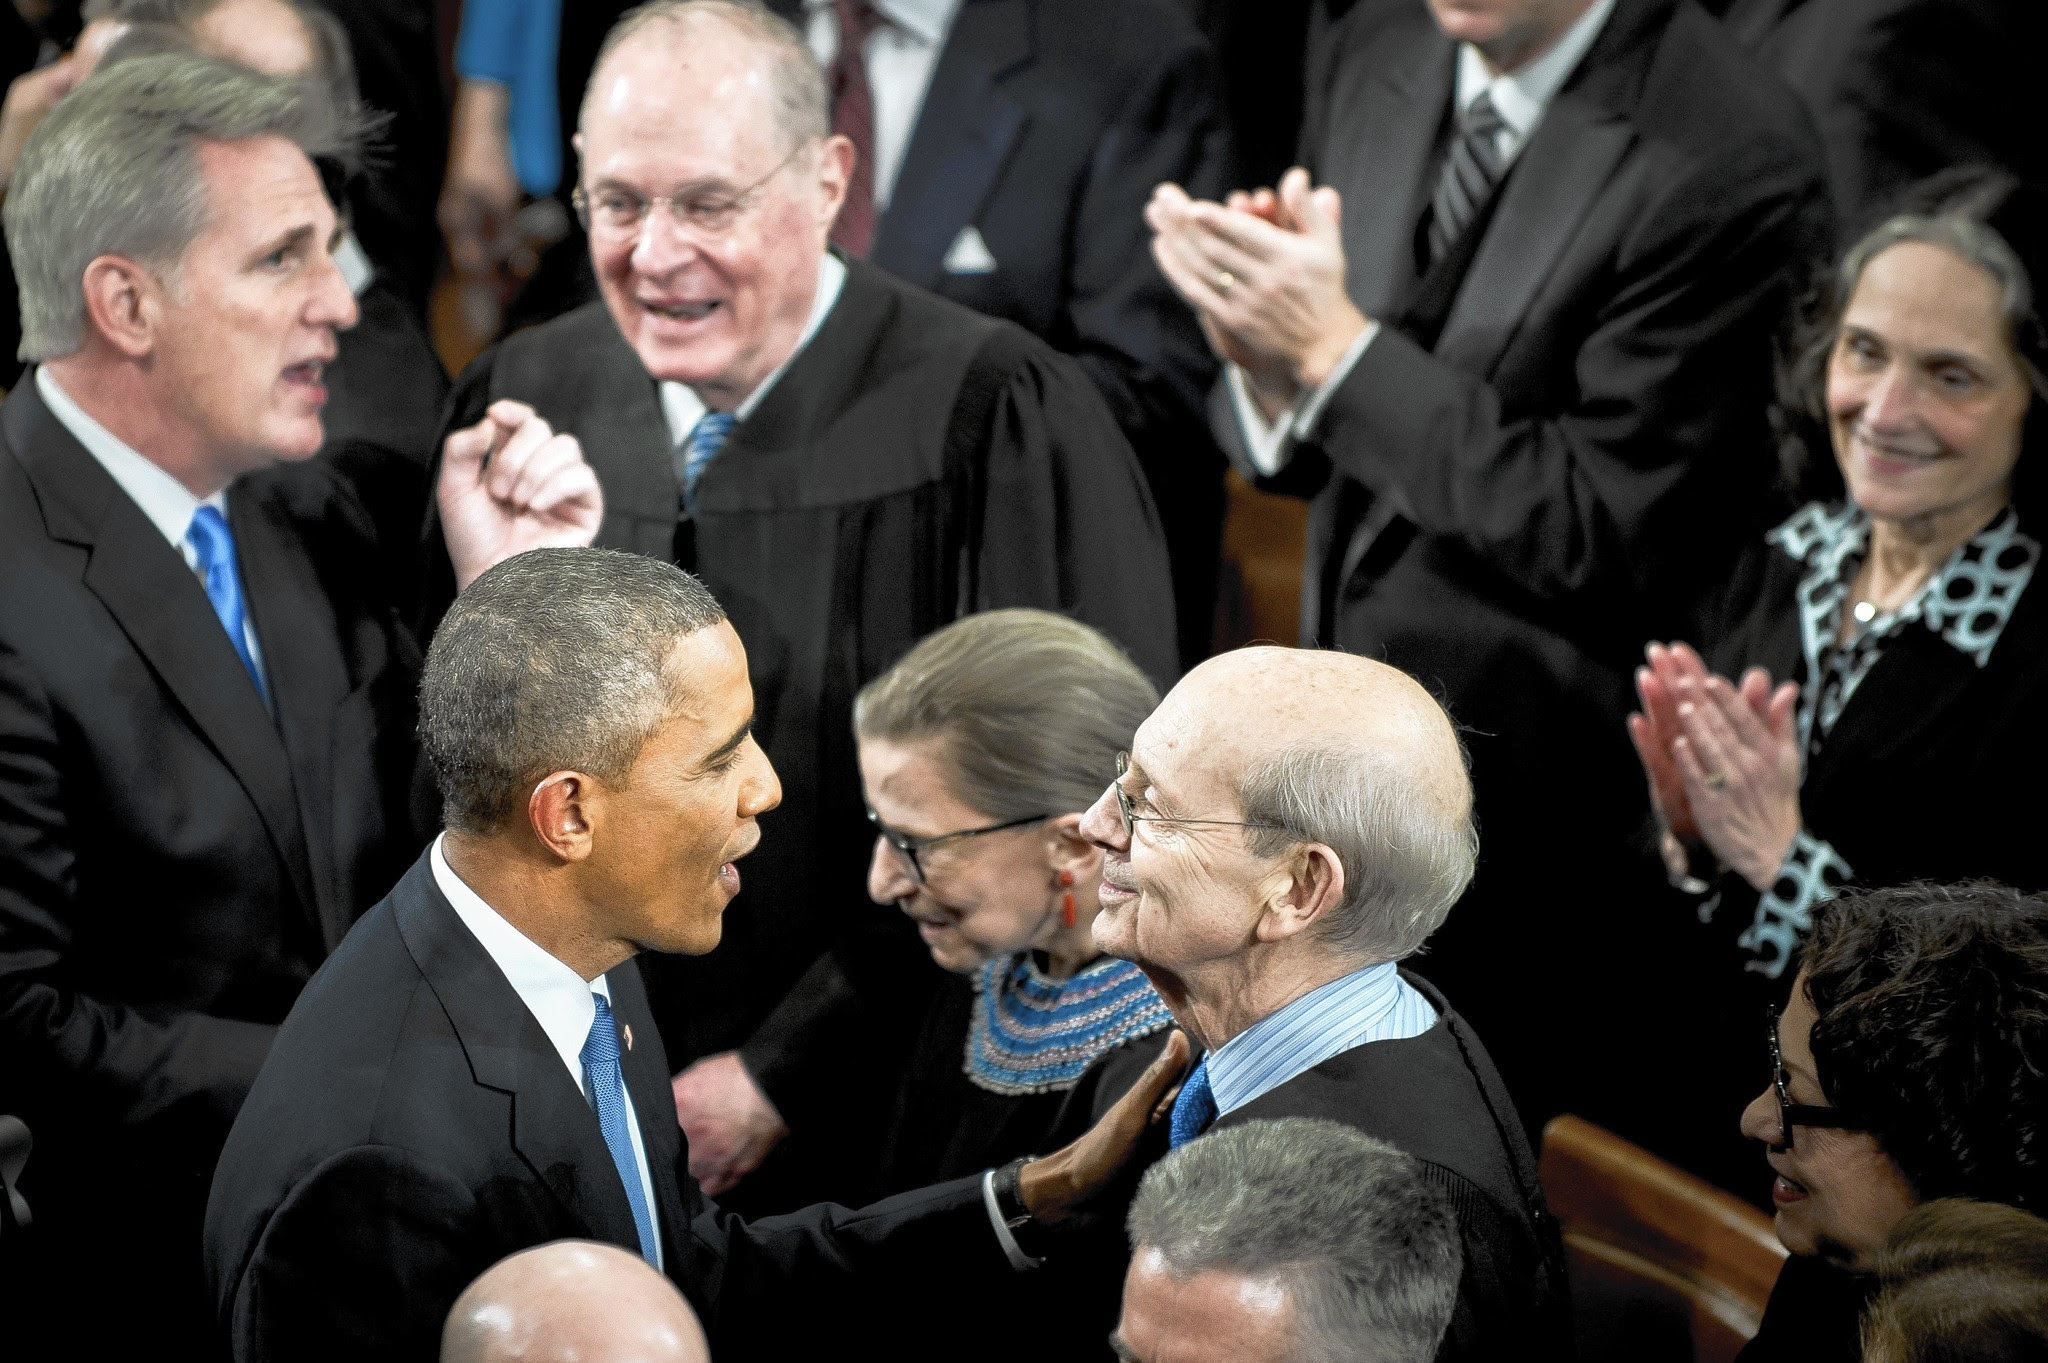 With State of the Union, Obama sets agenda ... for 2016 election